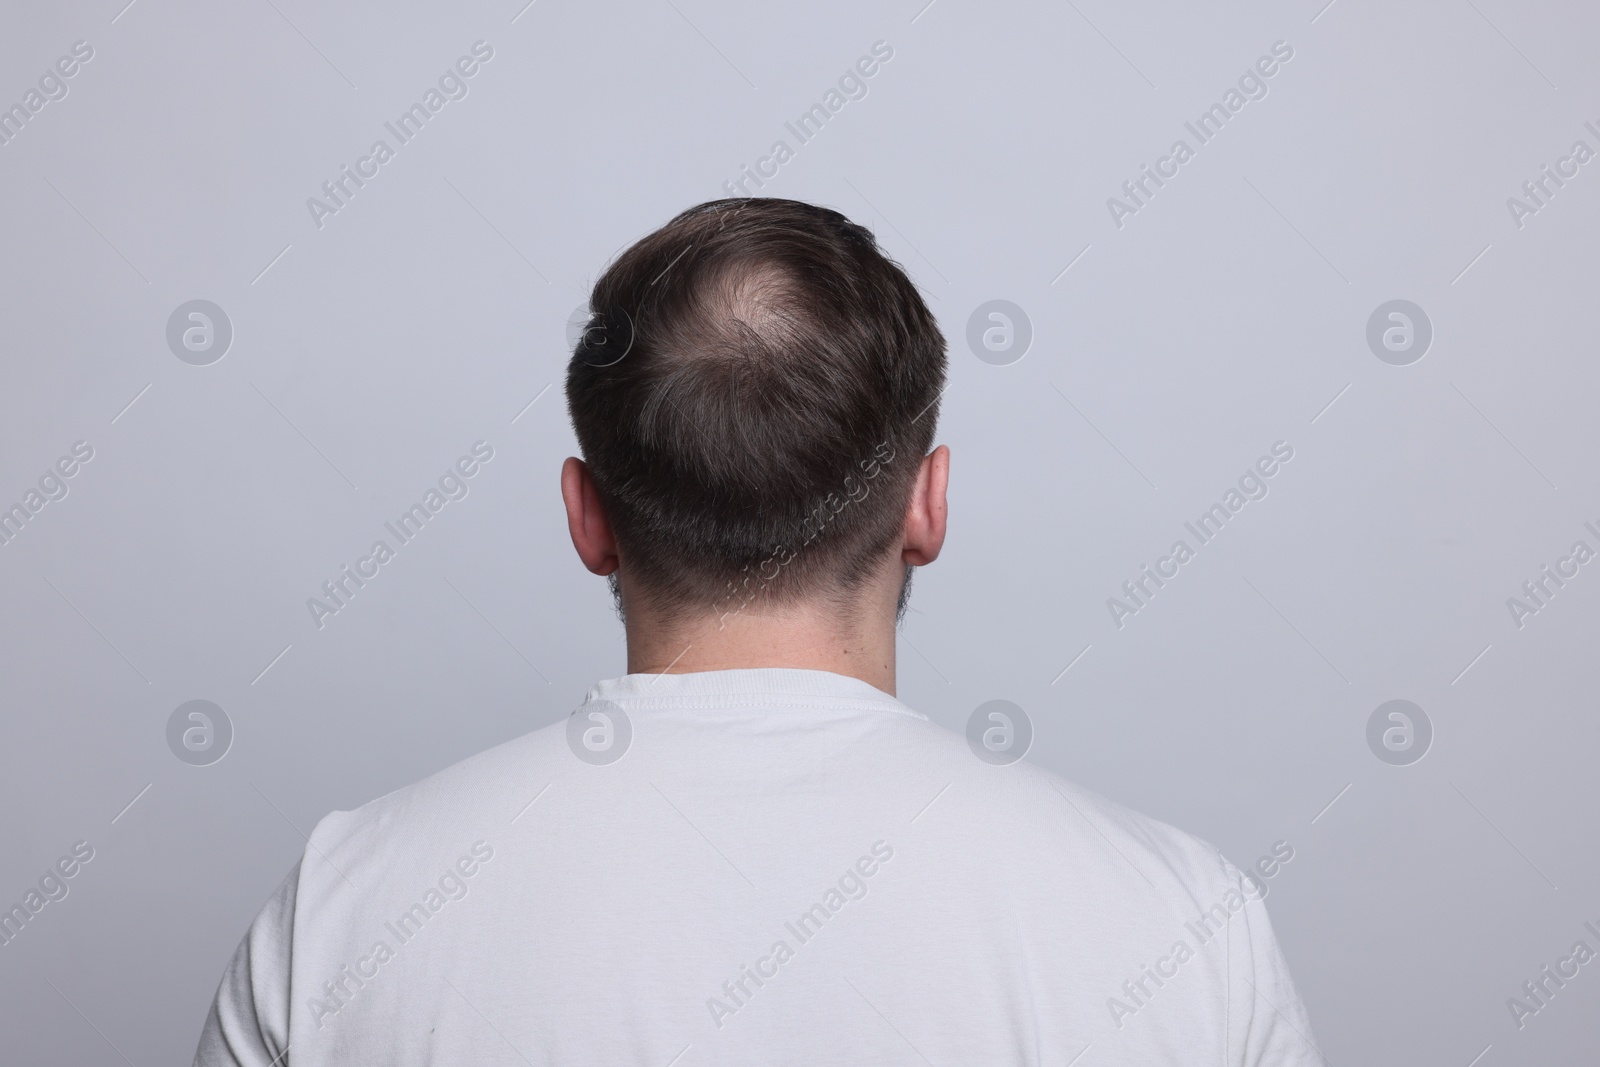 Photo of Baldness concept. Man with bald spot on light grey background, back view